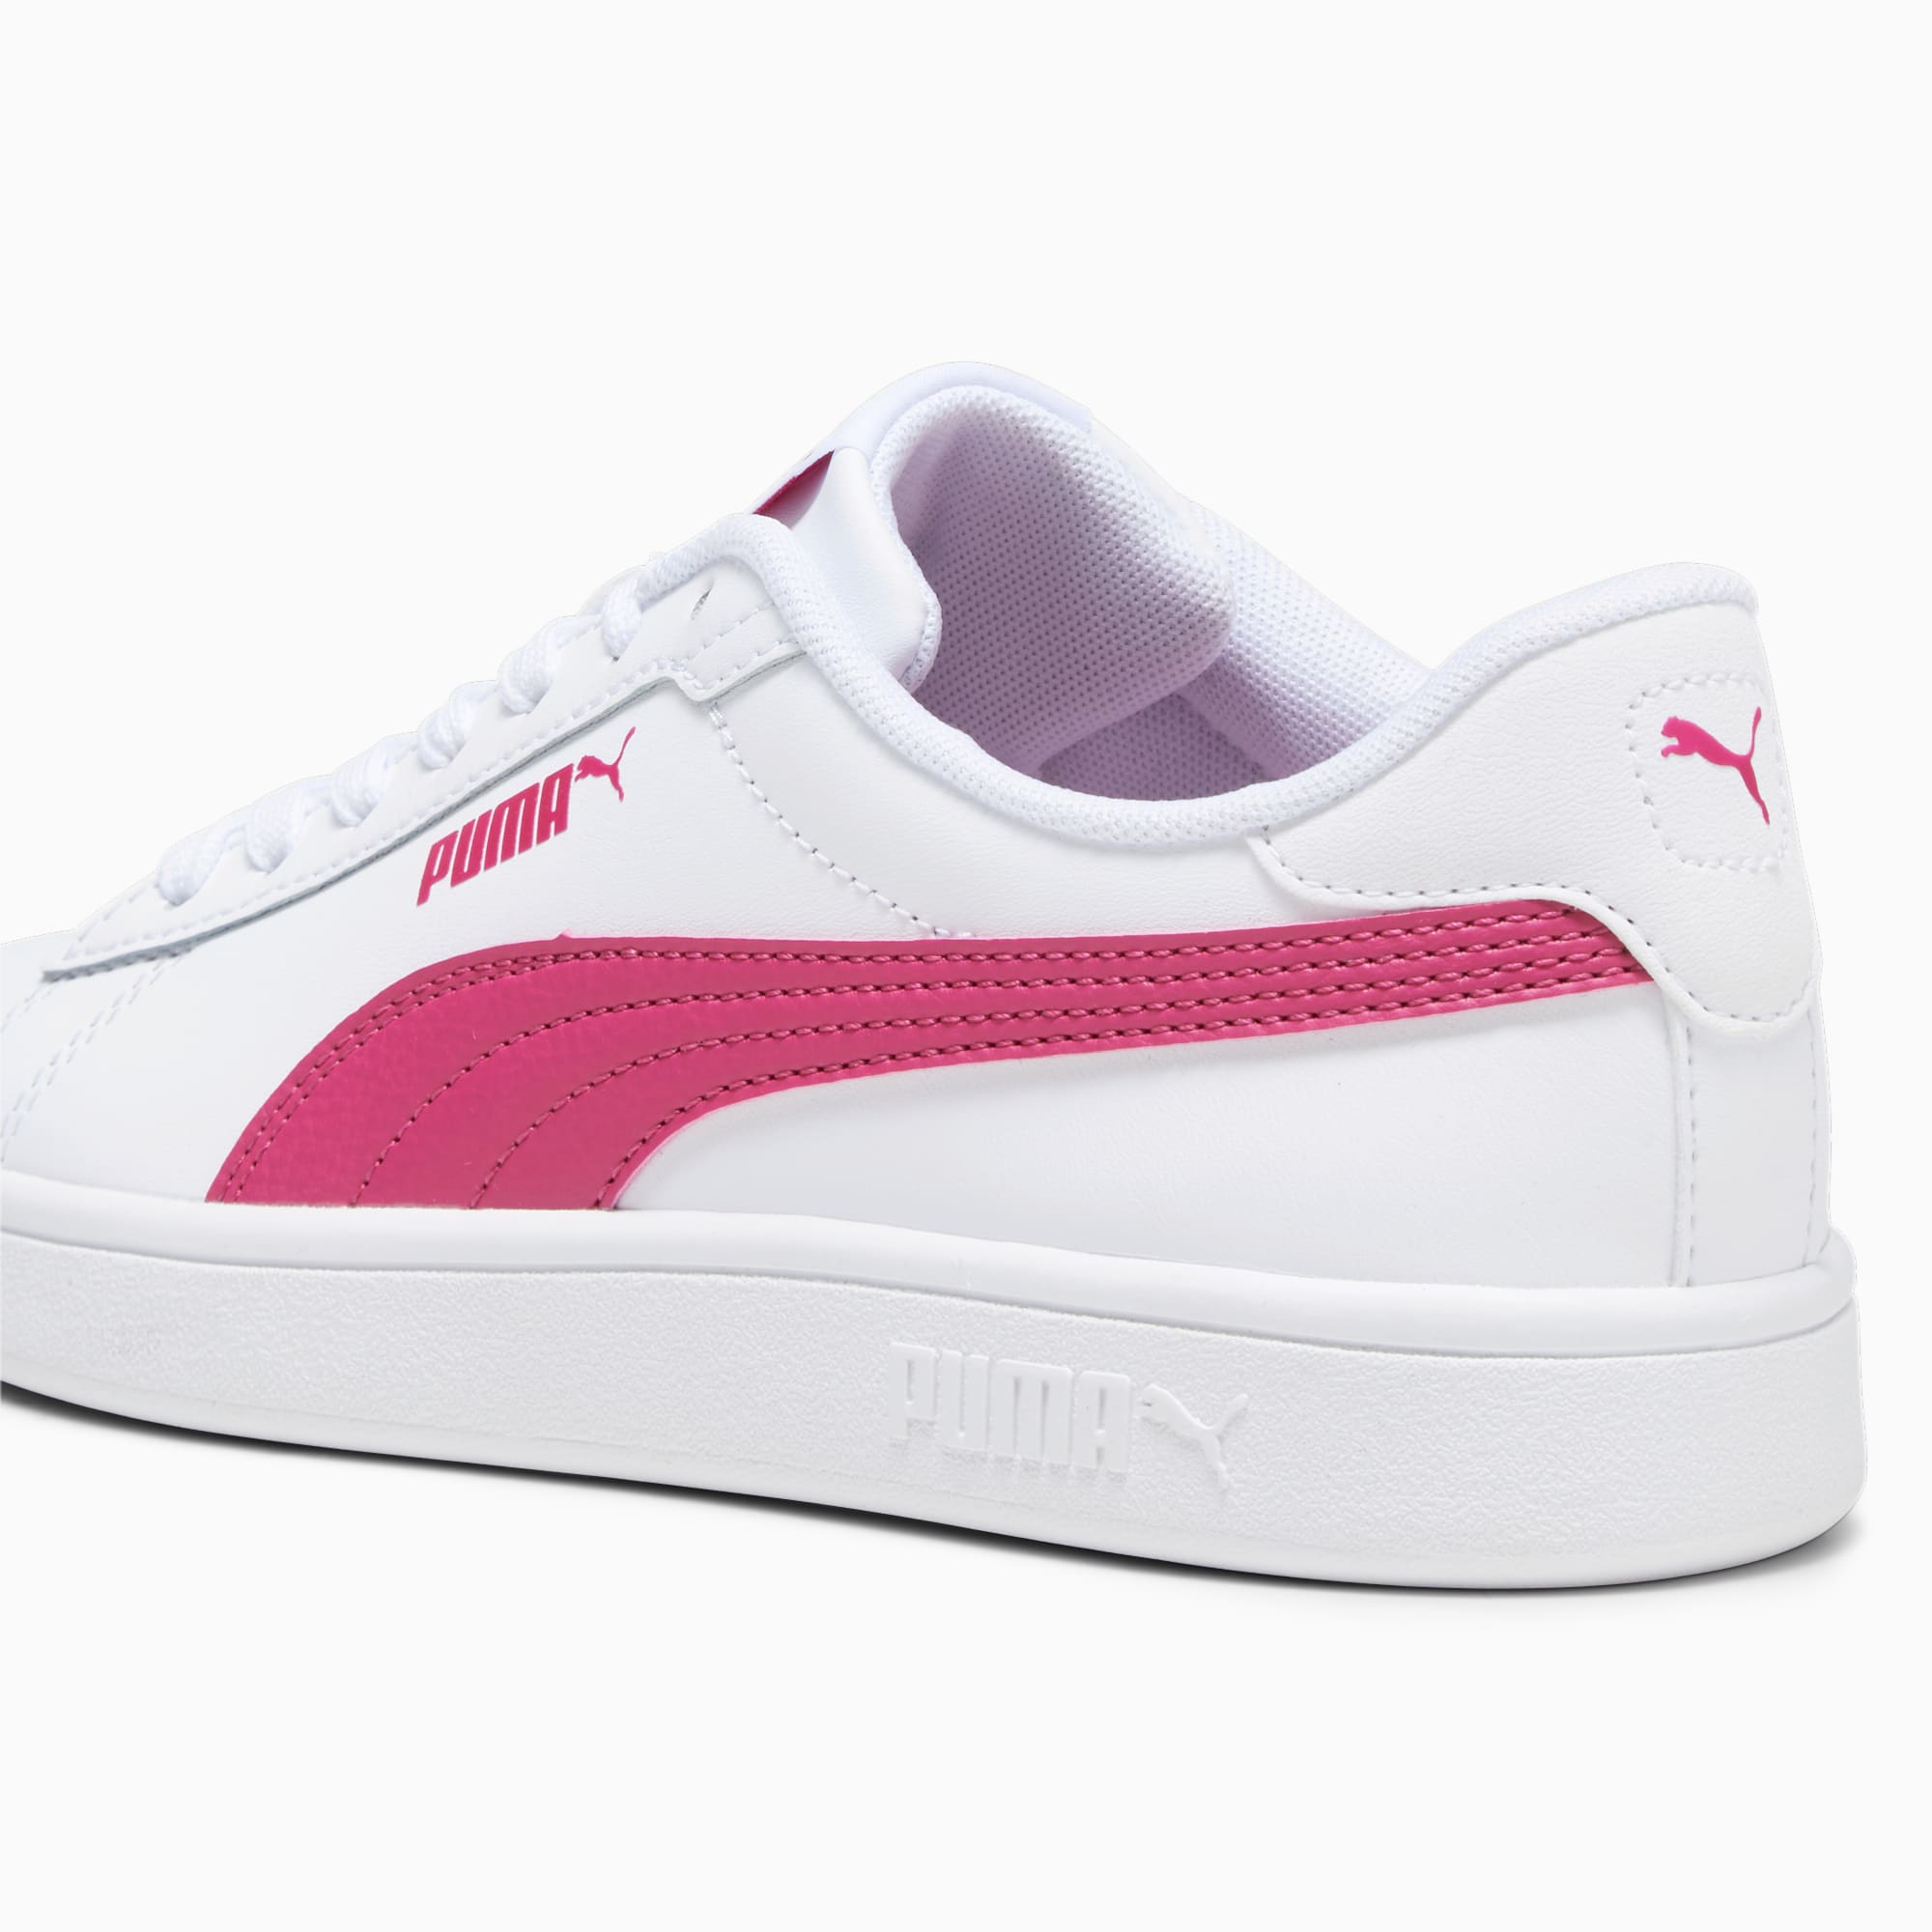 PUMA Smash 3.0 Leather Sneakers Youth, White/Pinktastic, Size 35,5, Shoes